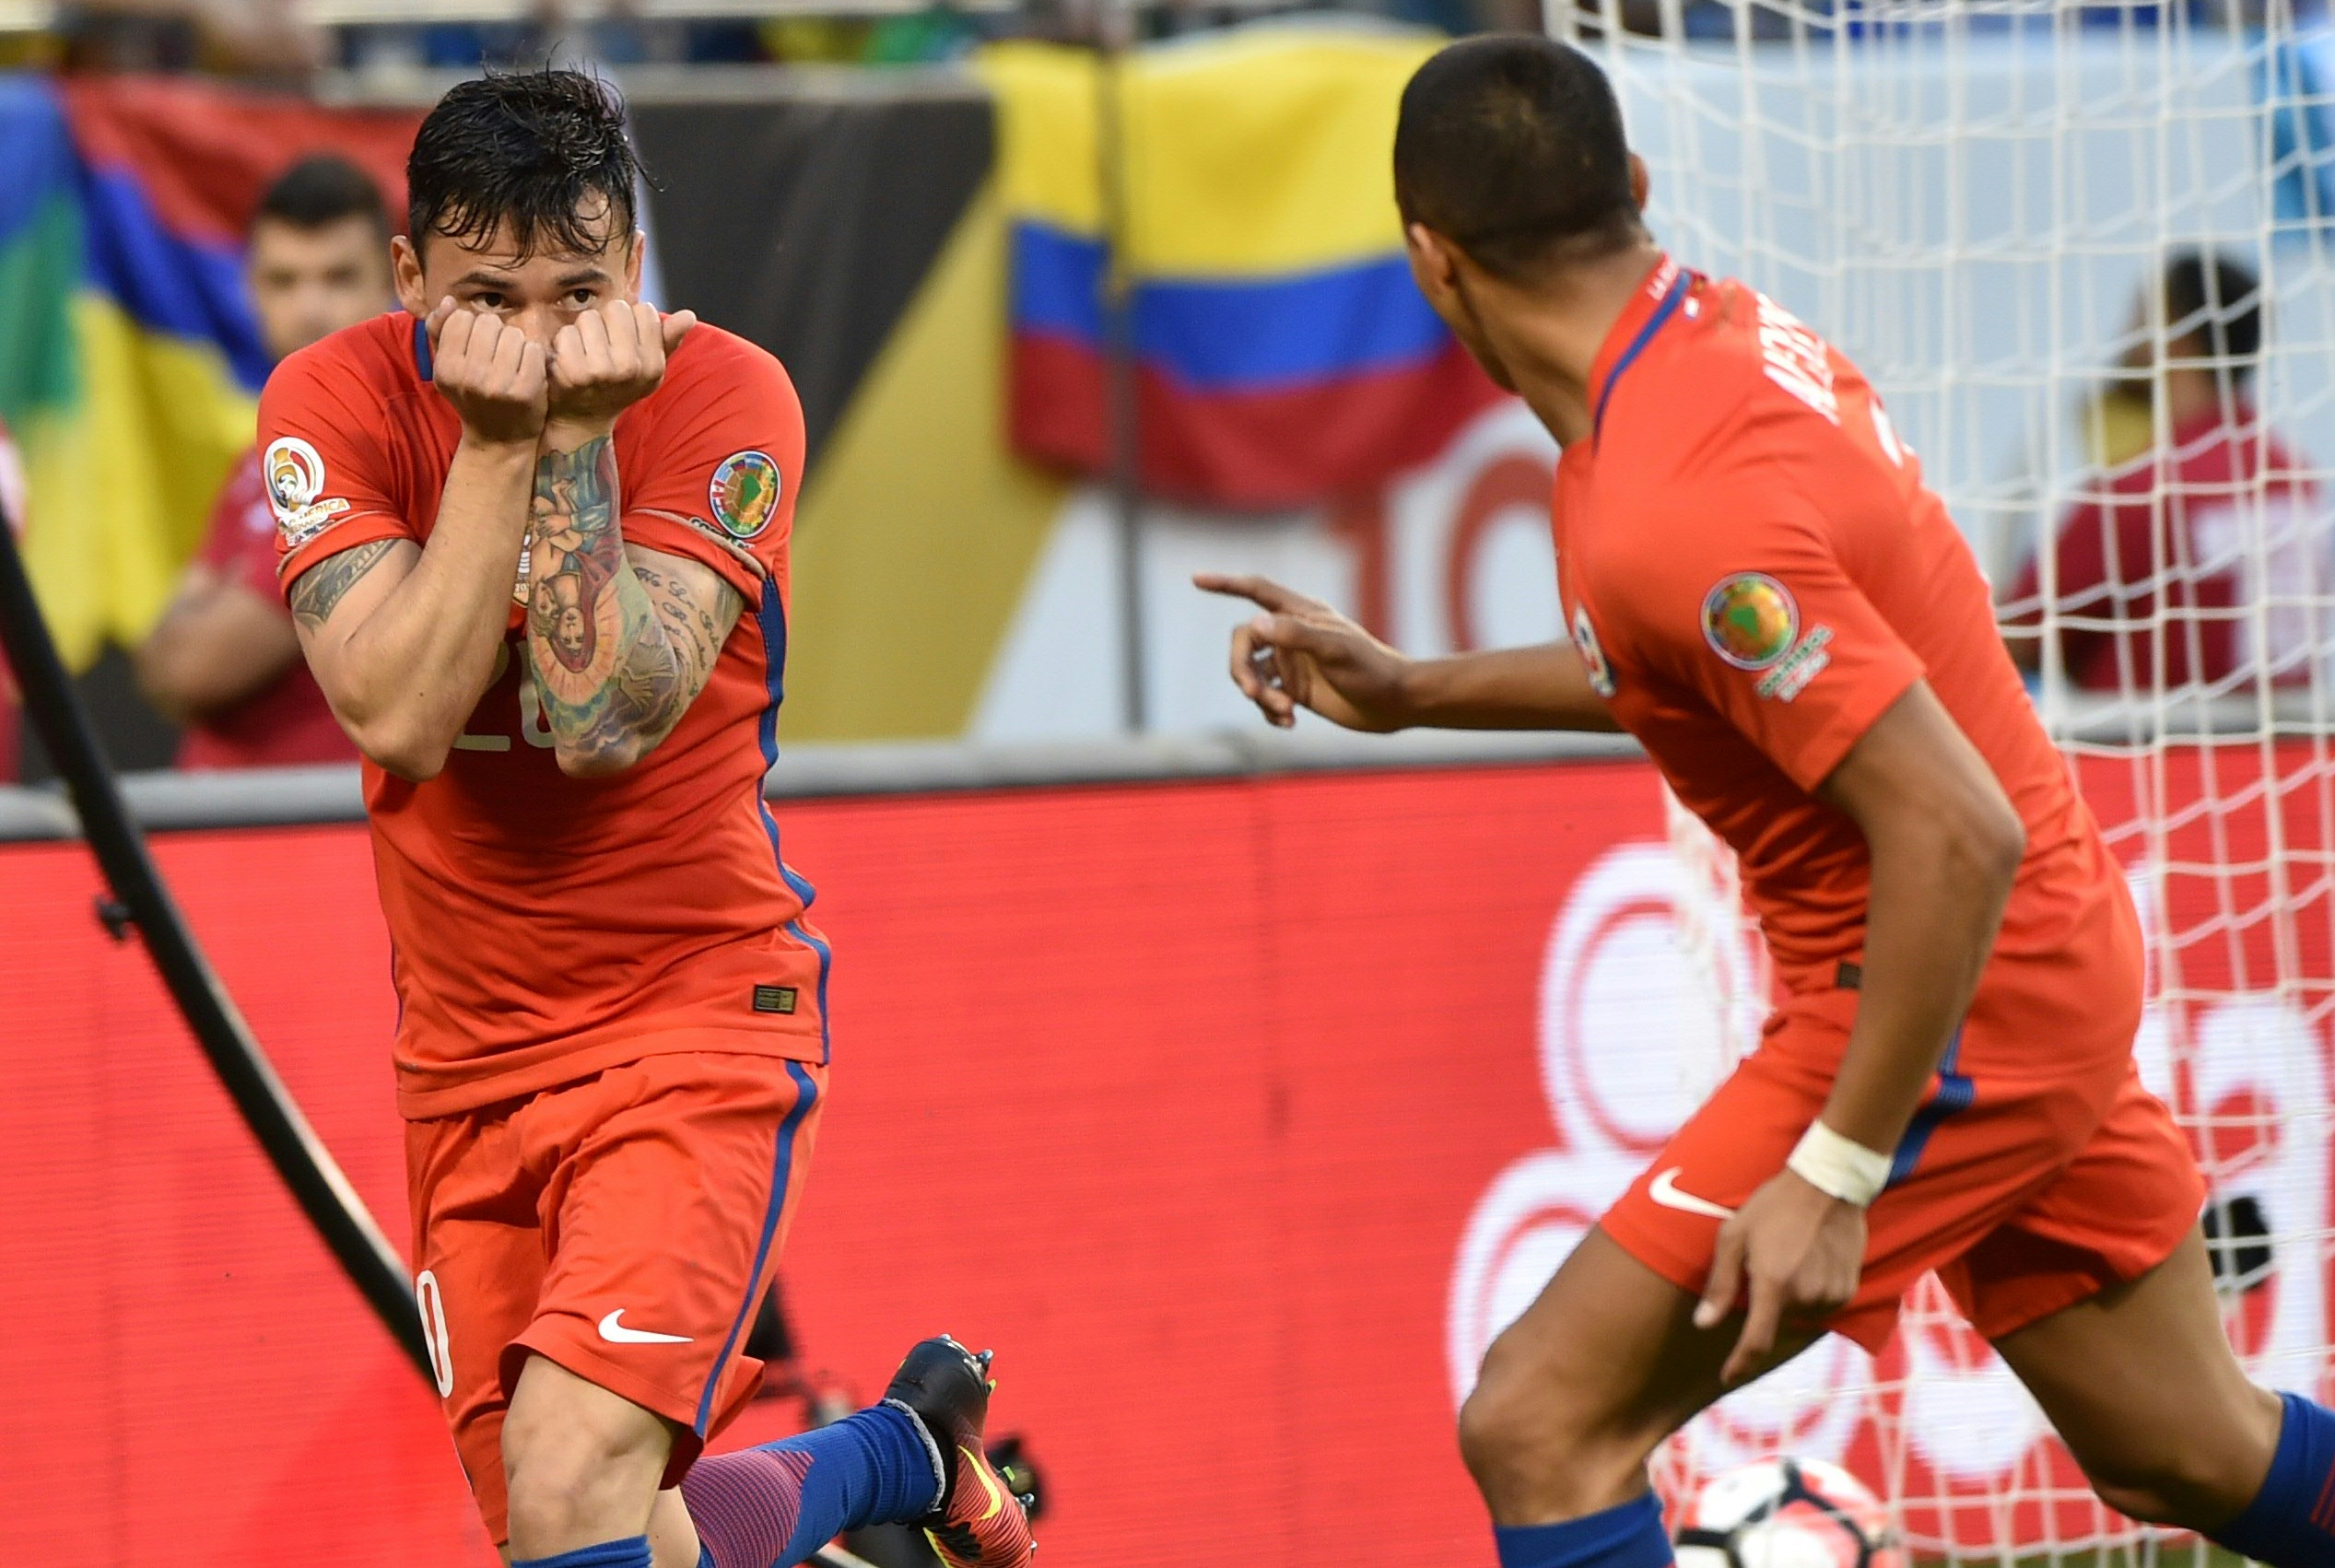 ChileColombia Highlights Score & Goals at Copa America